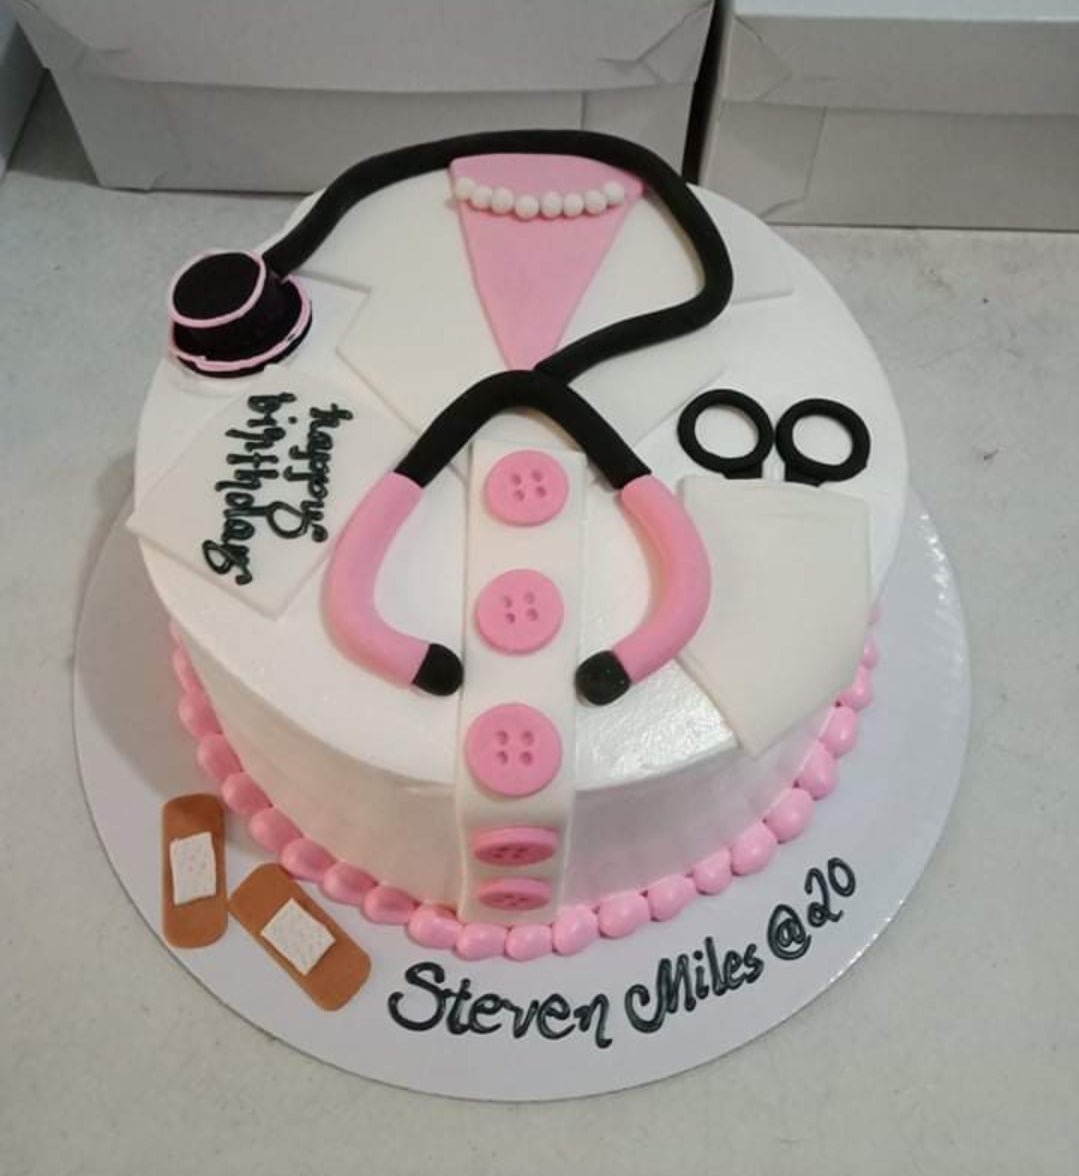 A birthday cake for a doctor 🎉🎂 - Cakes Art Boutique | Facebook